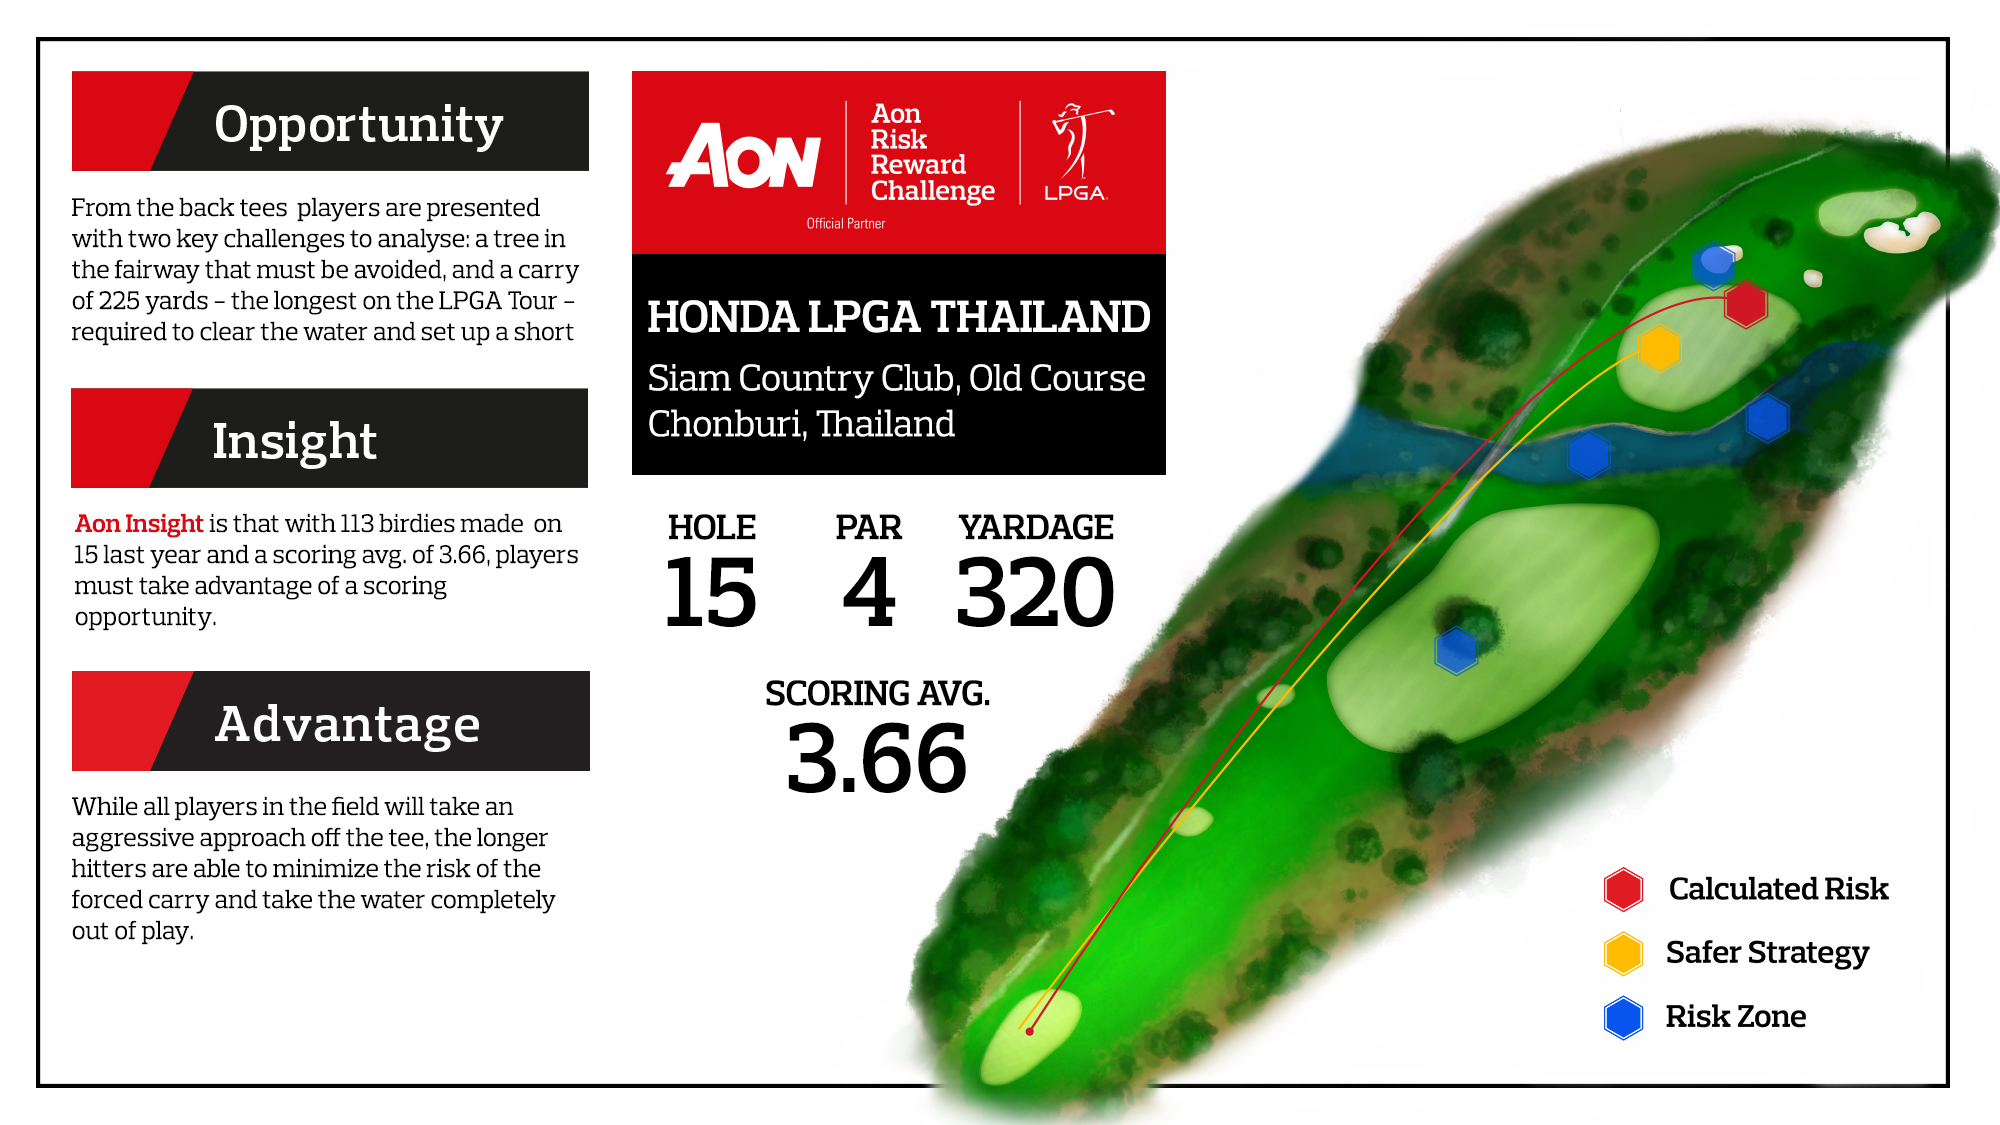 This week focuses on Siam Country Club's 15th hole, a risk-reward par-4 that can present a different scoring opportunity or strategic challenge, depending on the tee box used.